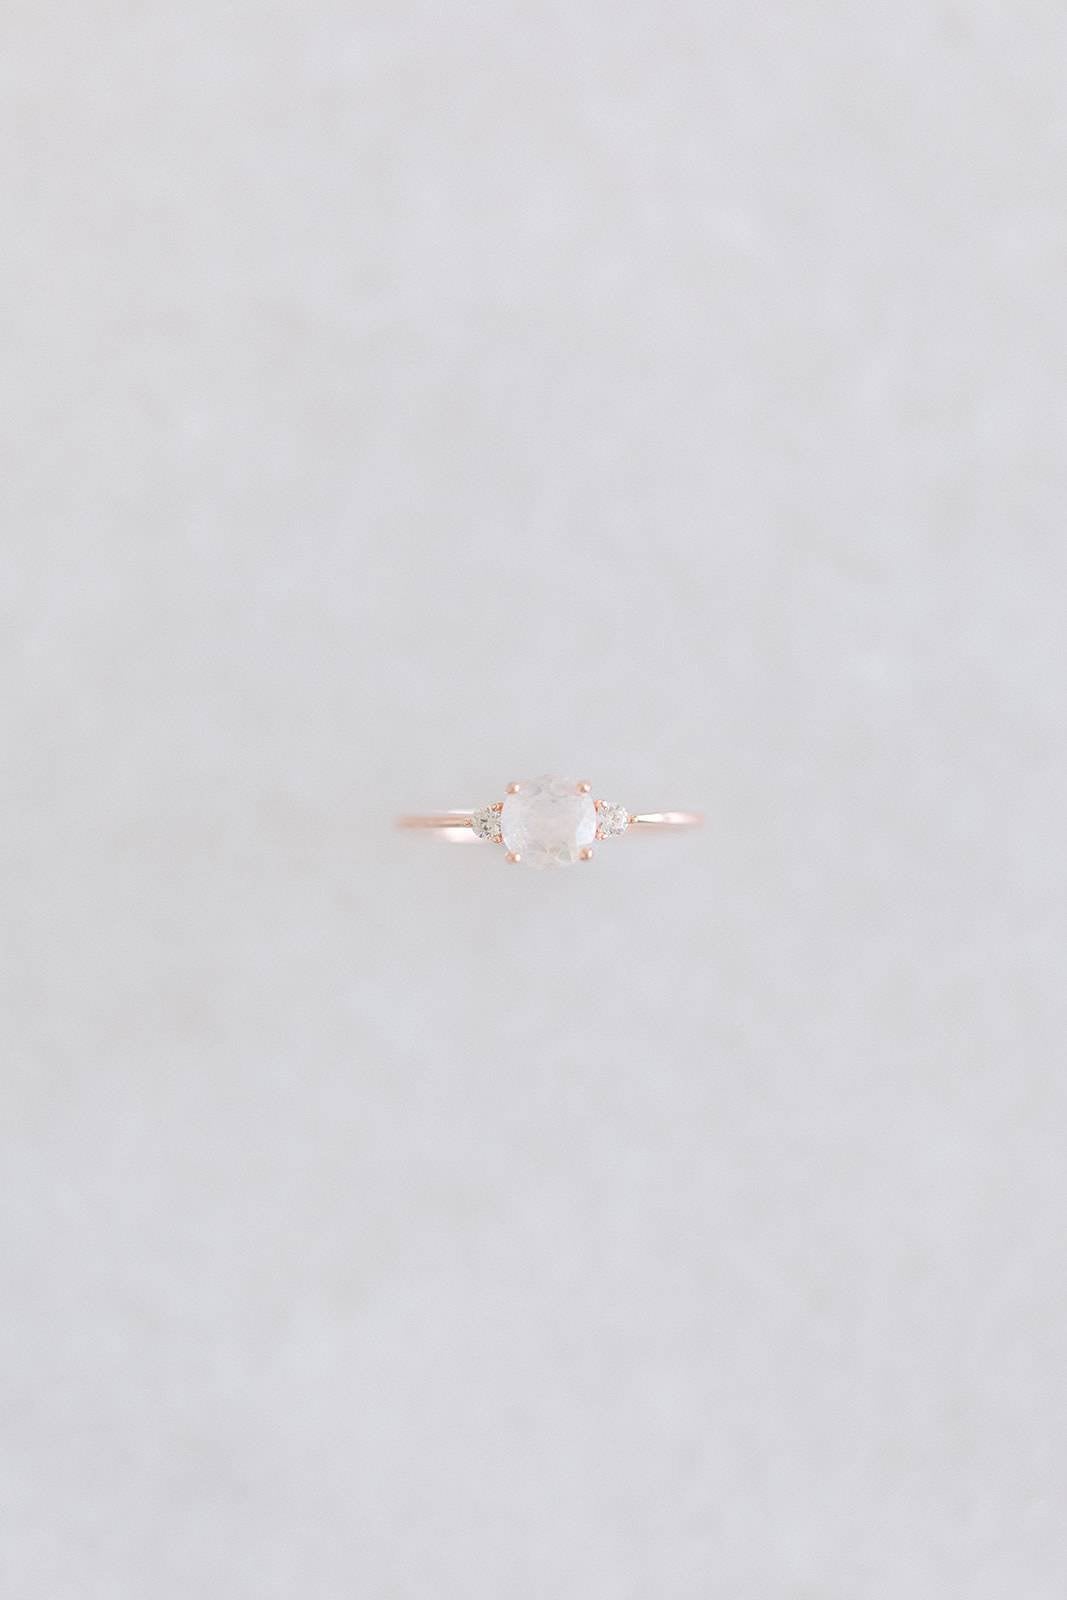 Moonstone x Rose Gold Ring - dainty - Fine Jewelry Collection